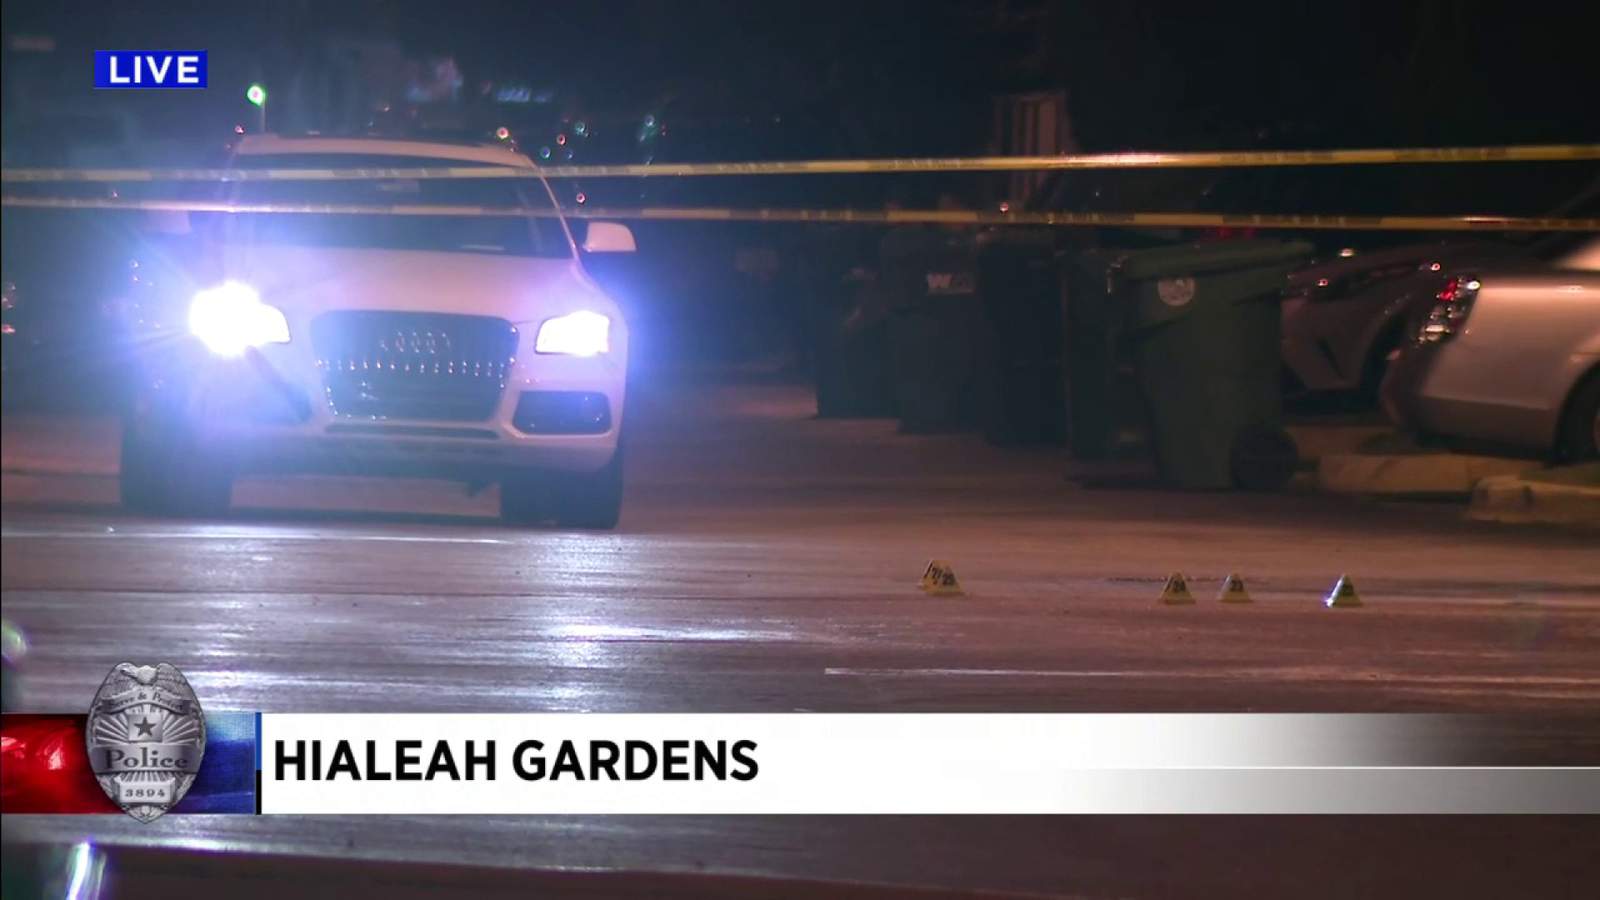 Officers return fire after gunman shoots at police in Hialeah Gardens, police say